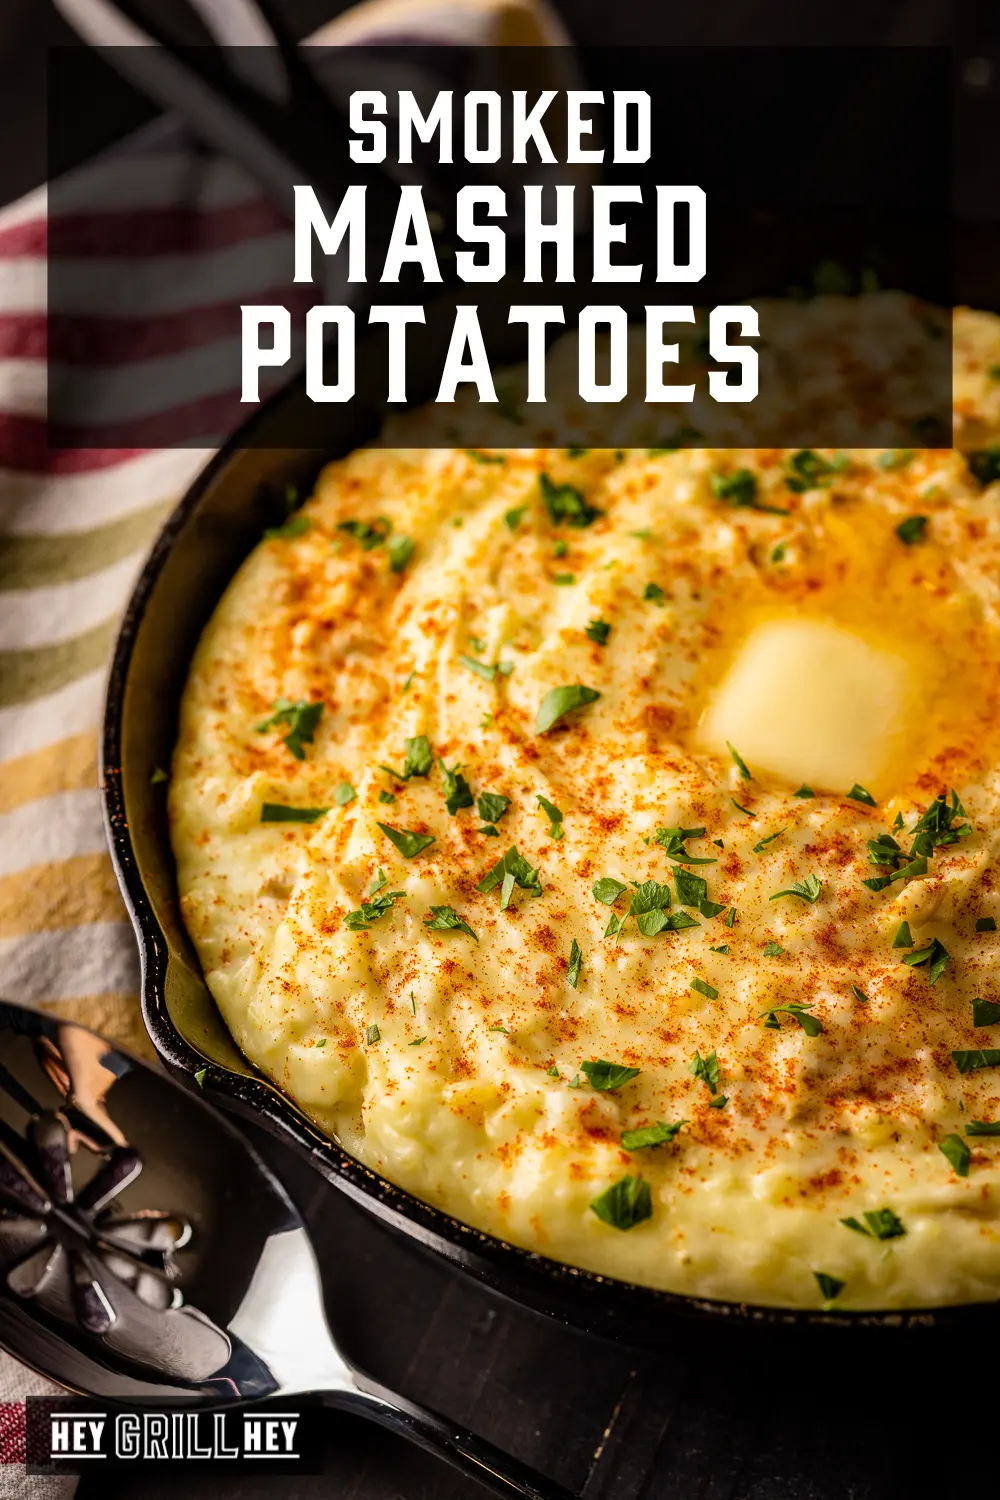 smoked mashed potatoes - What does Gordon Ramsay put in his mashed potatoes